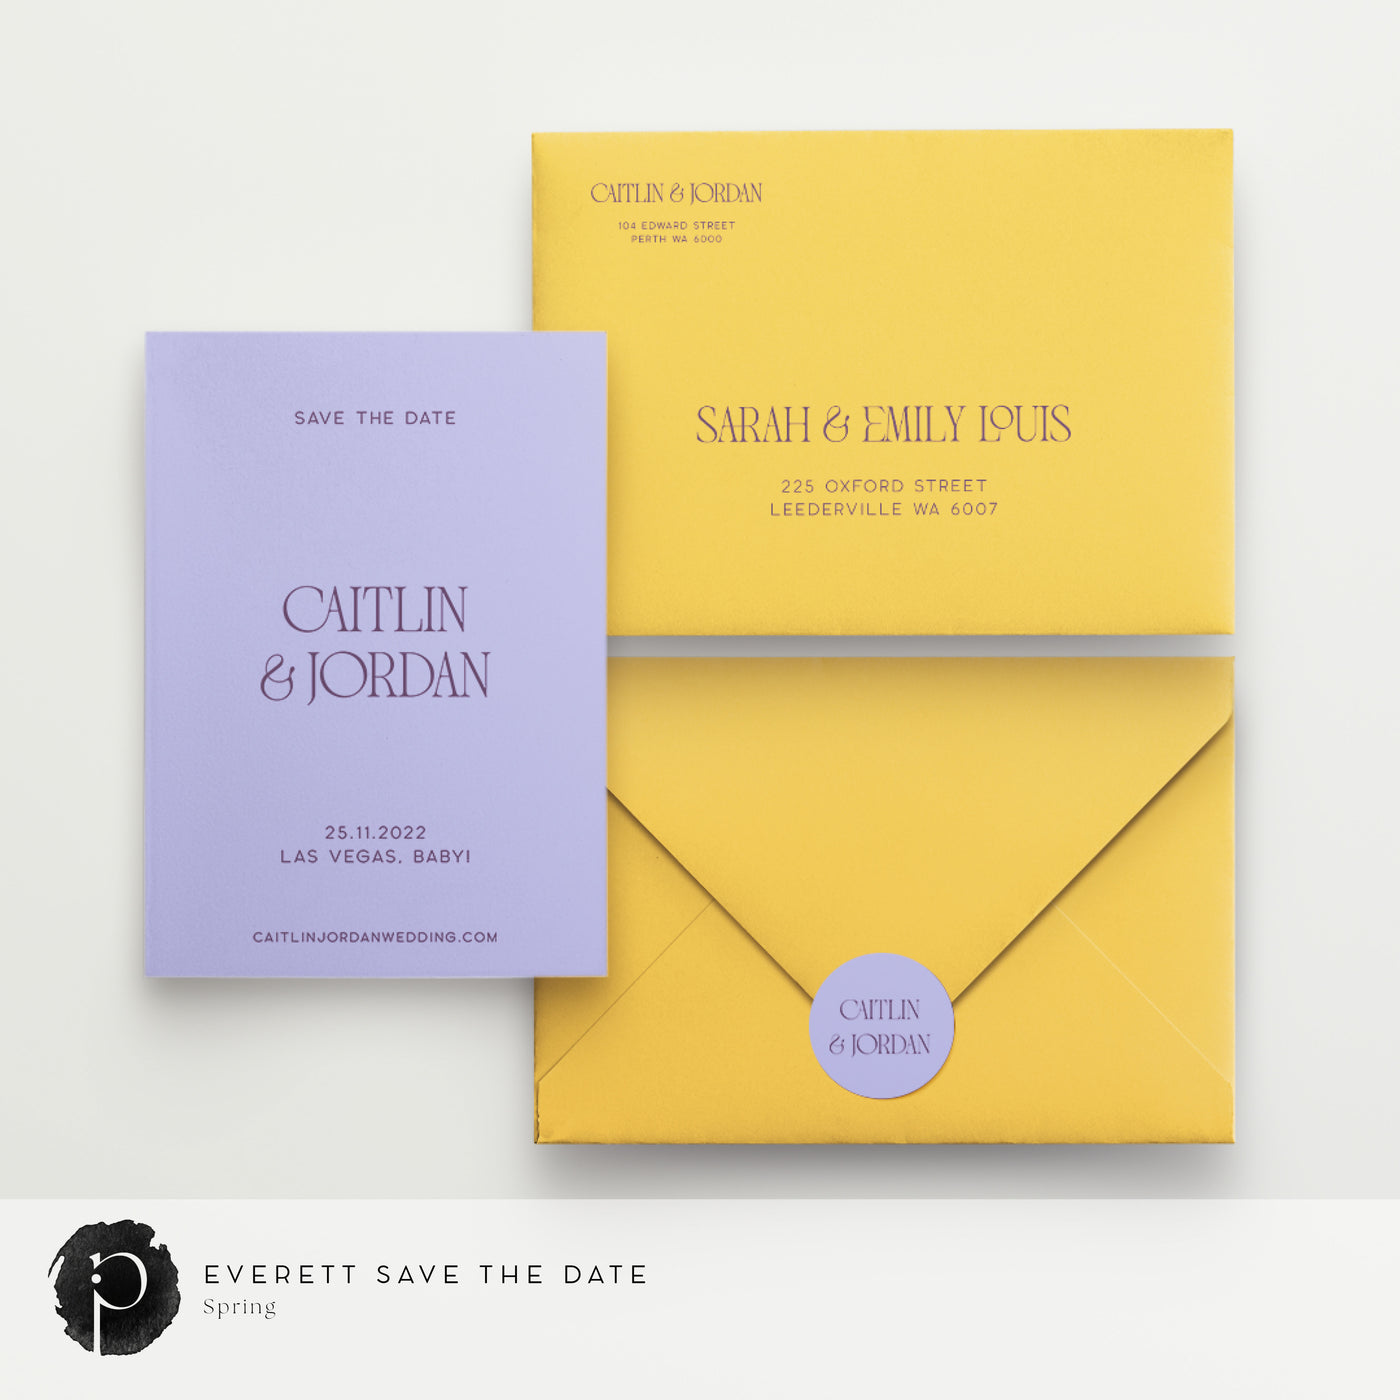 Everett - Save The Date Cards